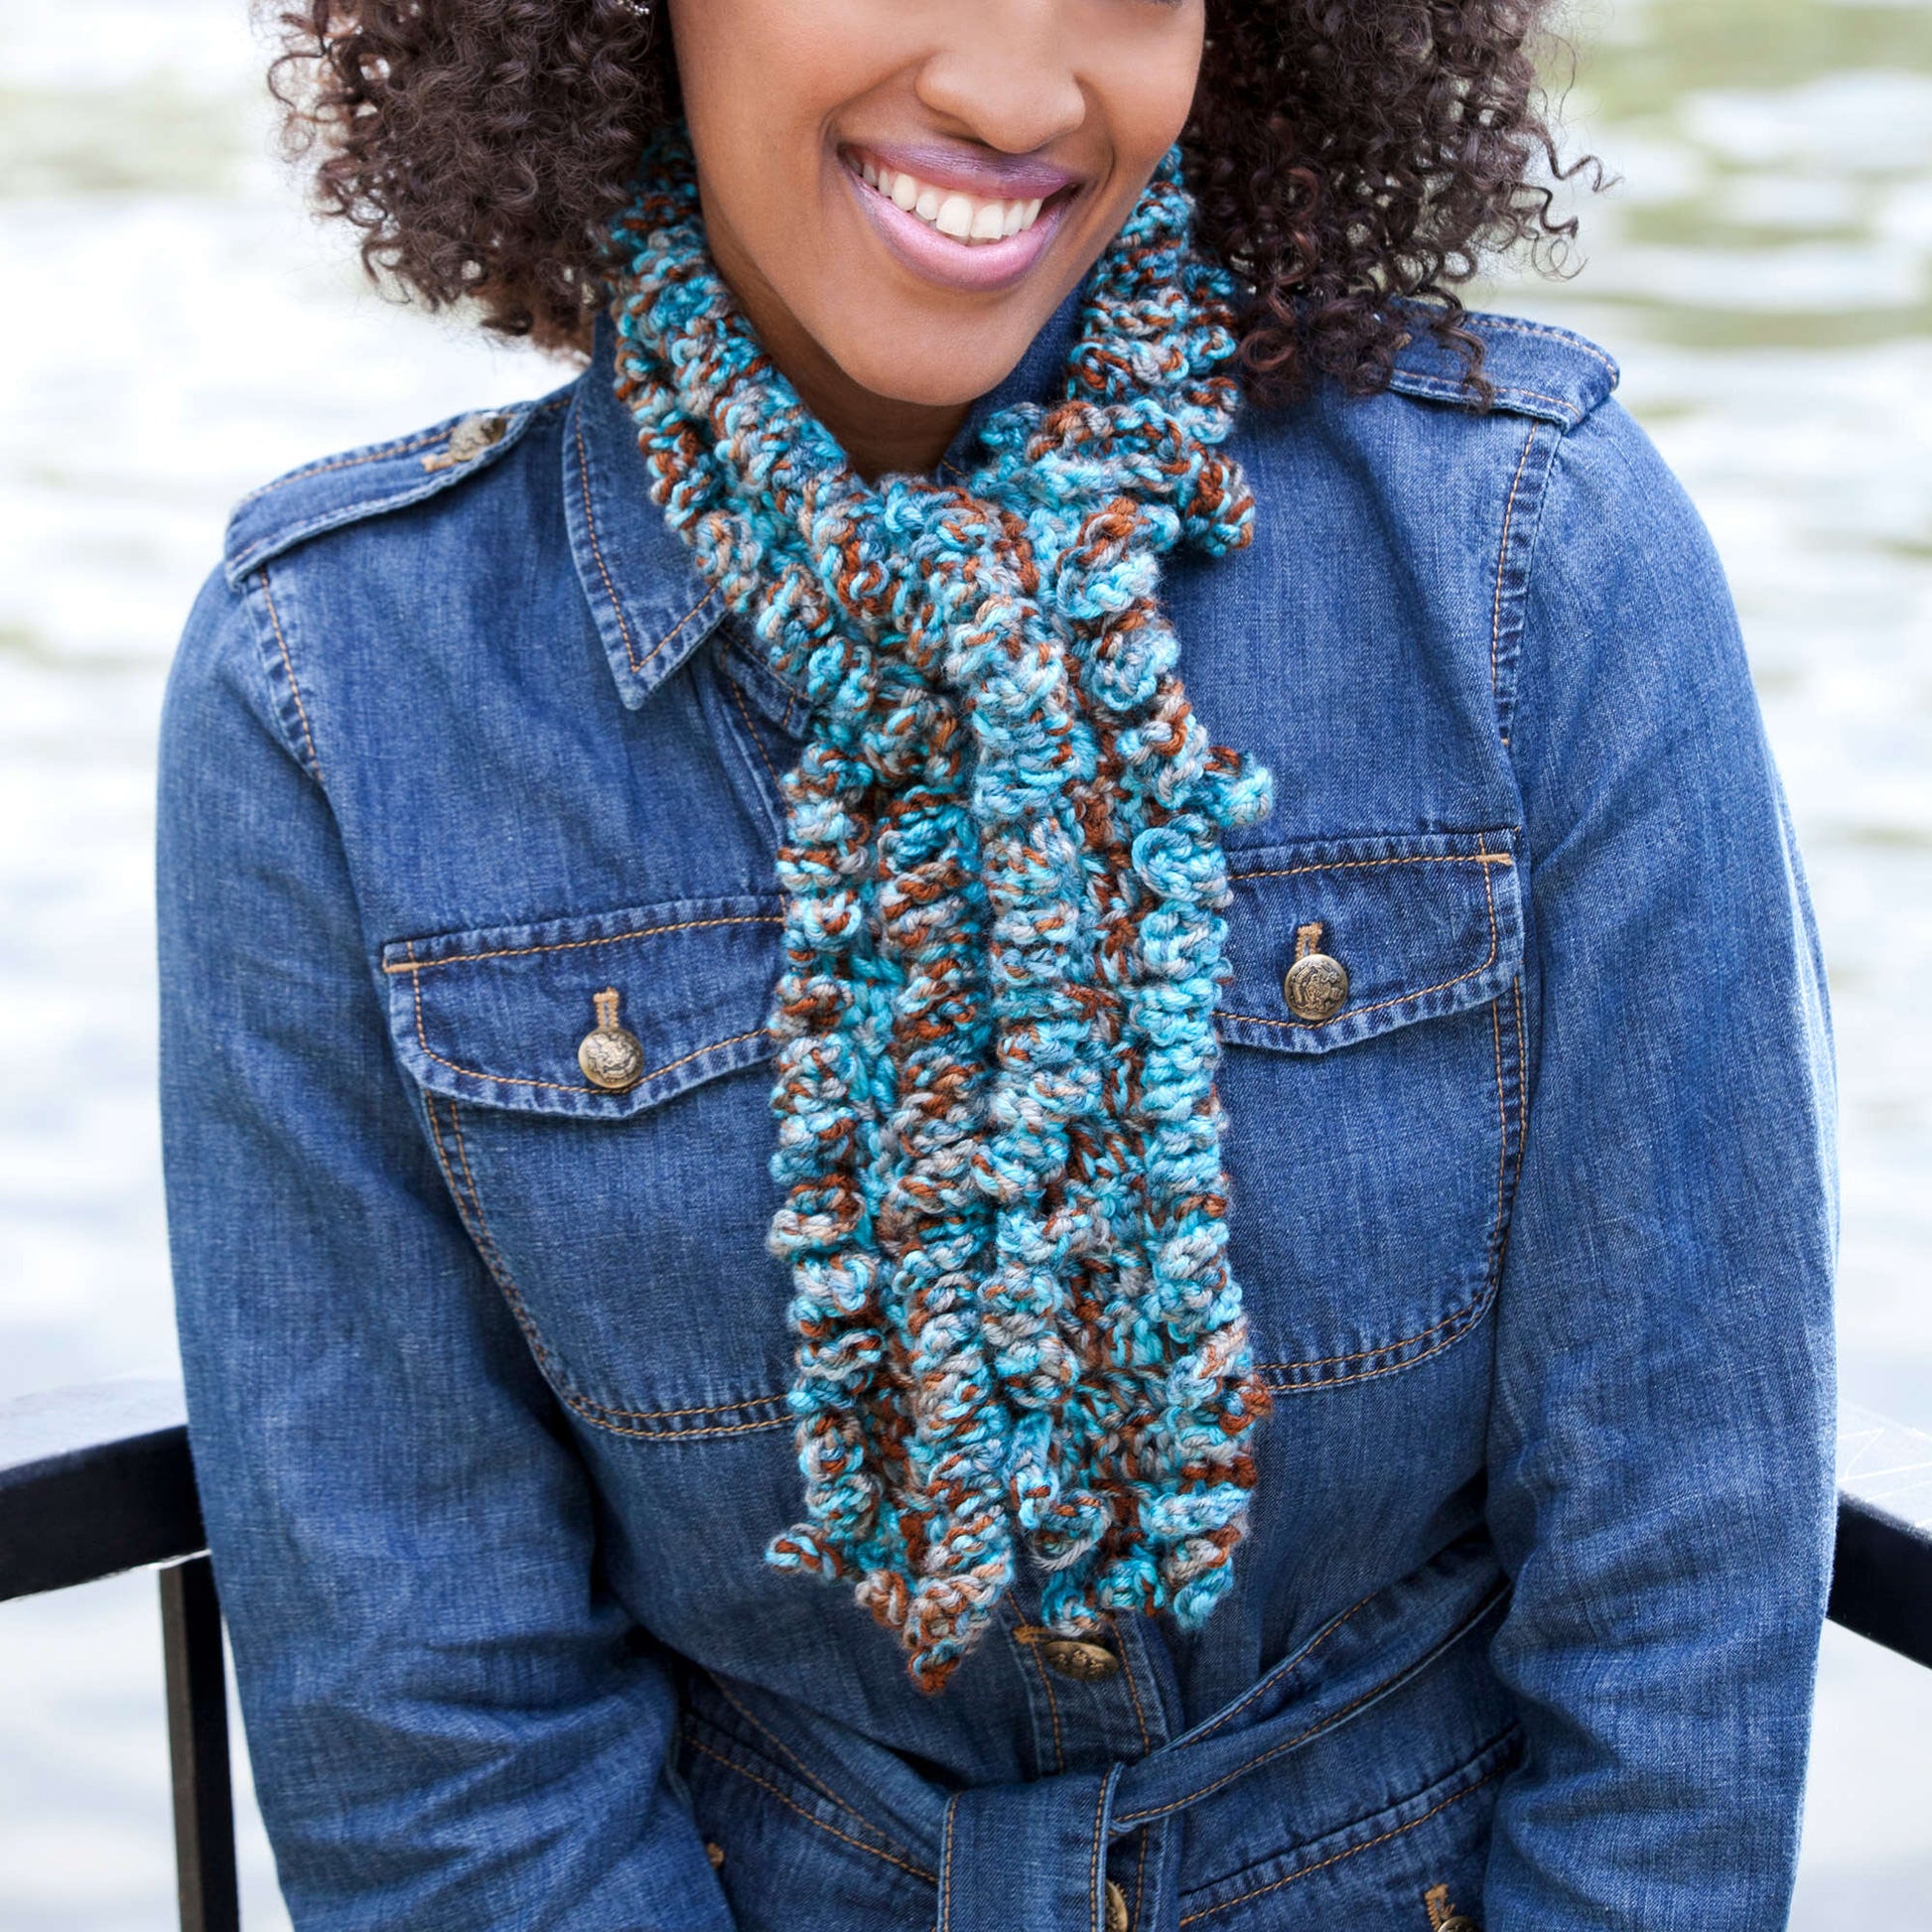 Free Red Heart Crochet Textured Travel Scarf Pattern